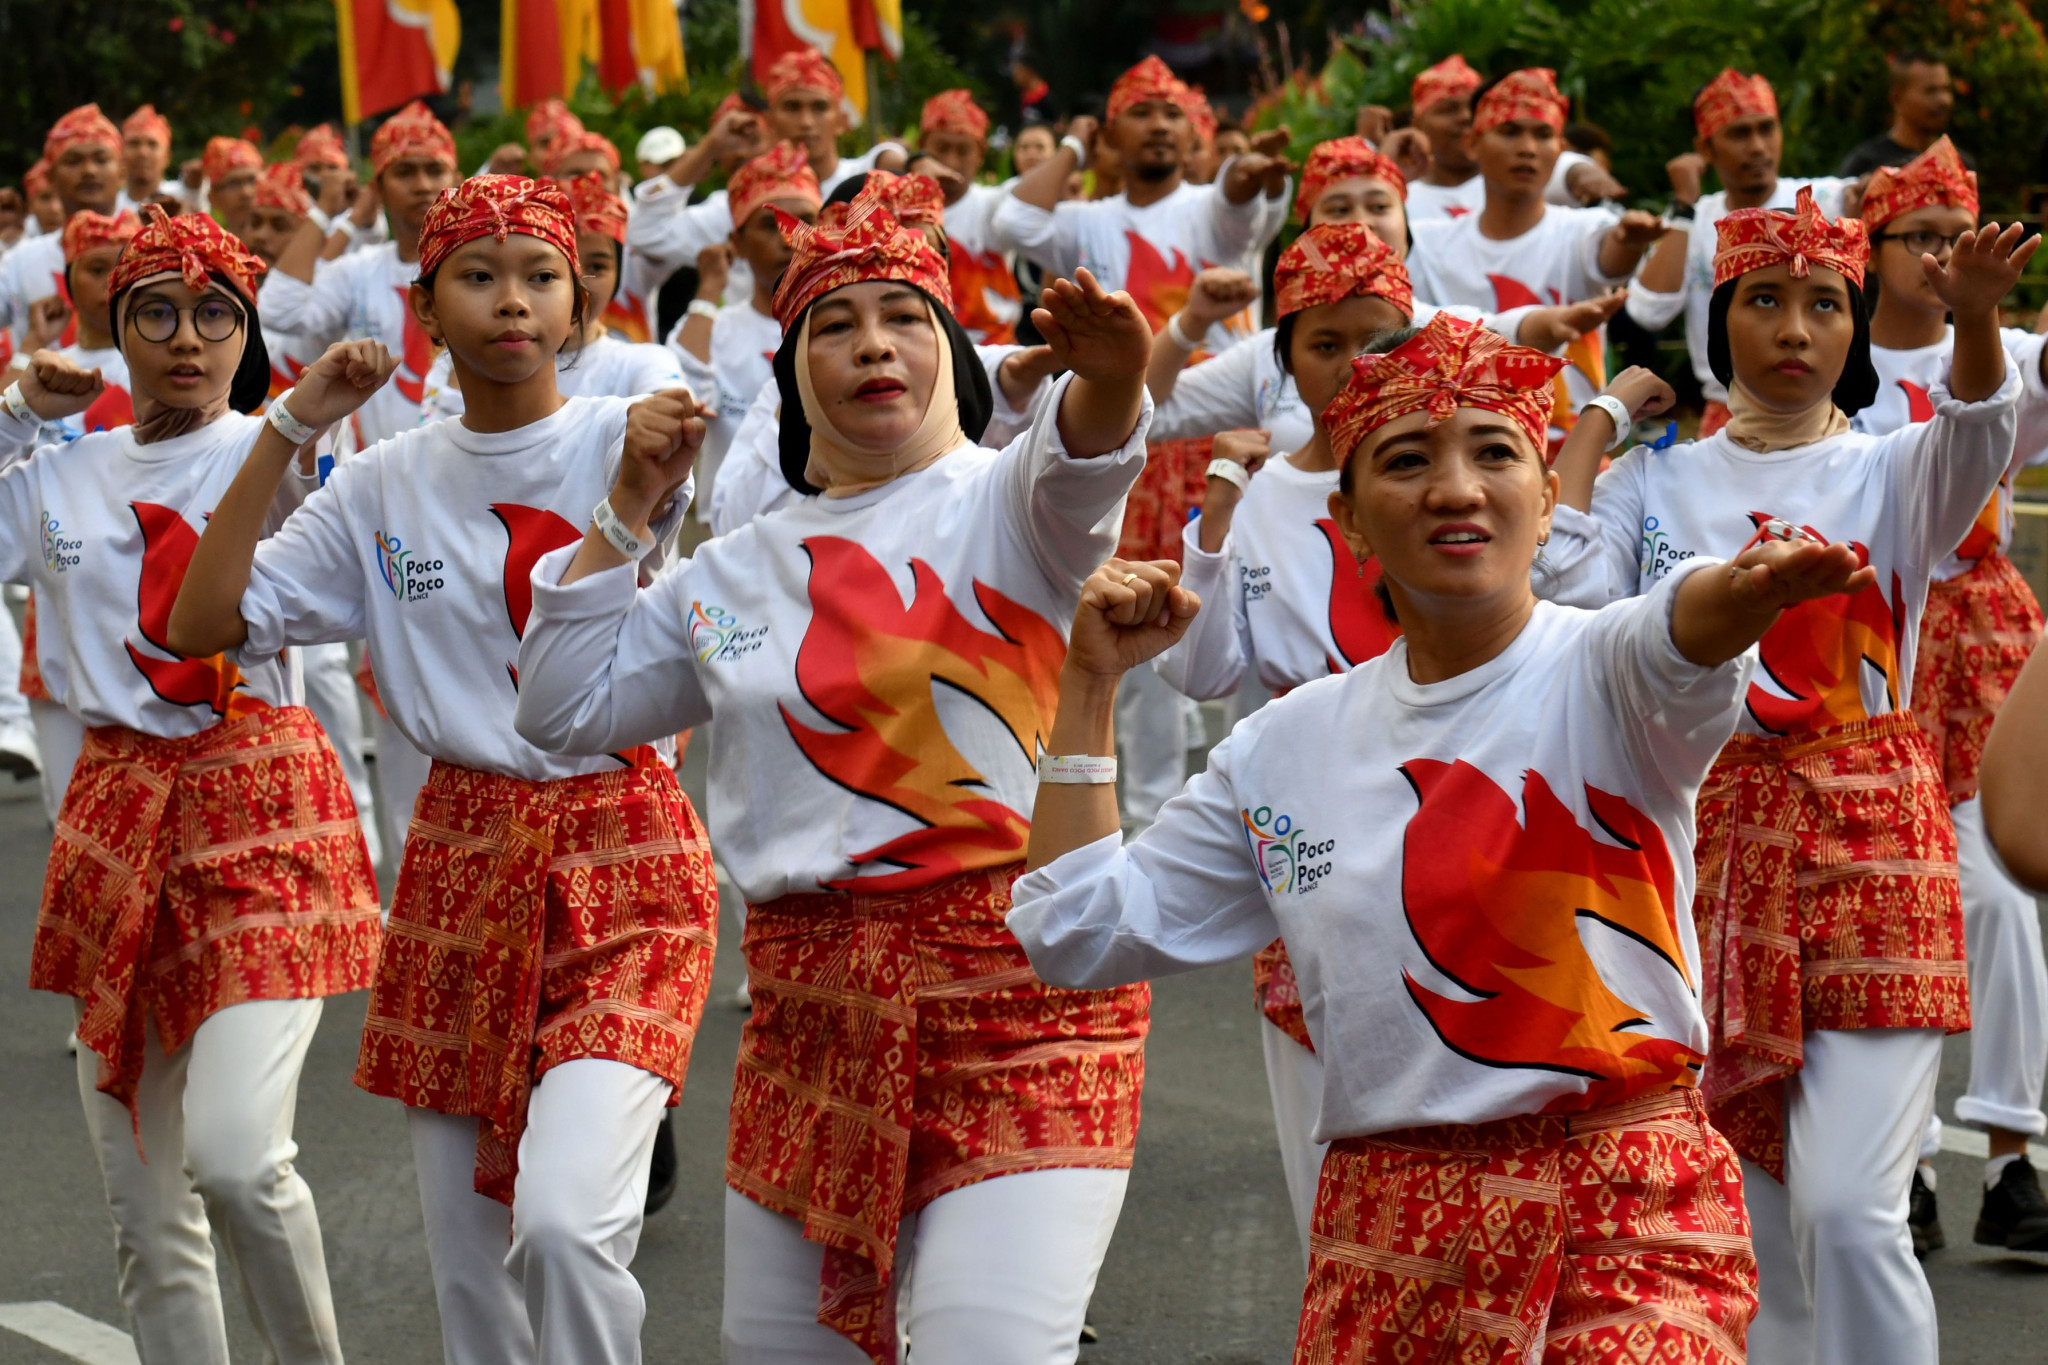 The traditional dance helped promote the Asian Games ©Getty Images